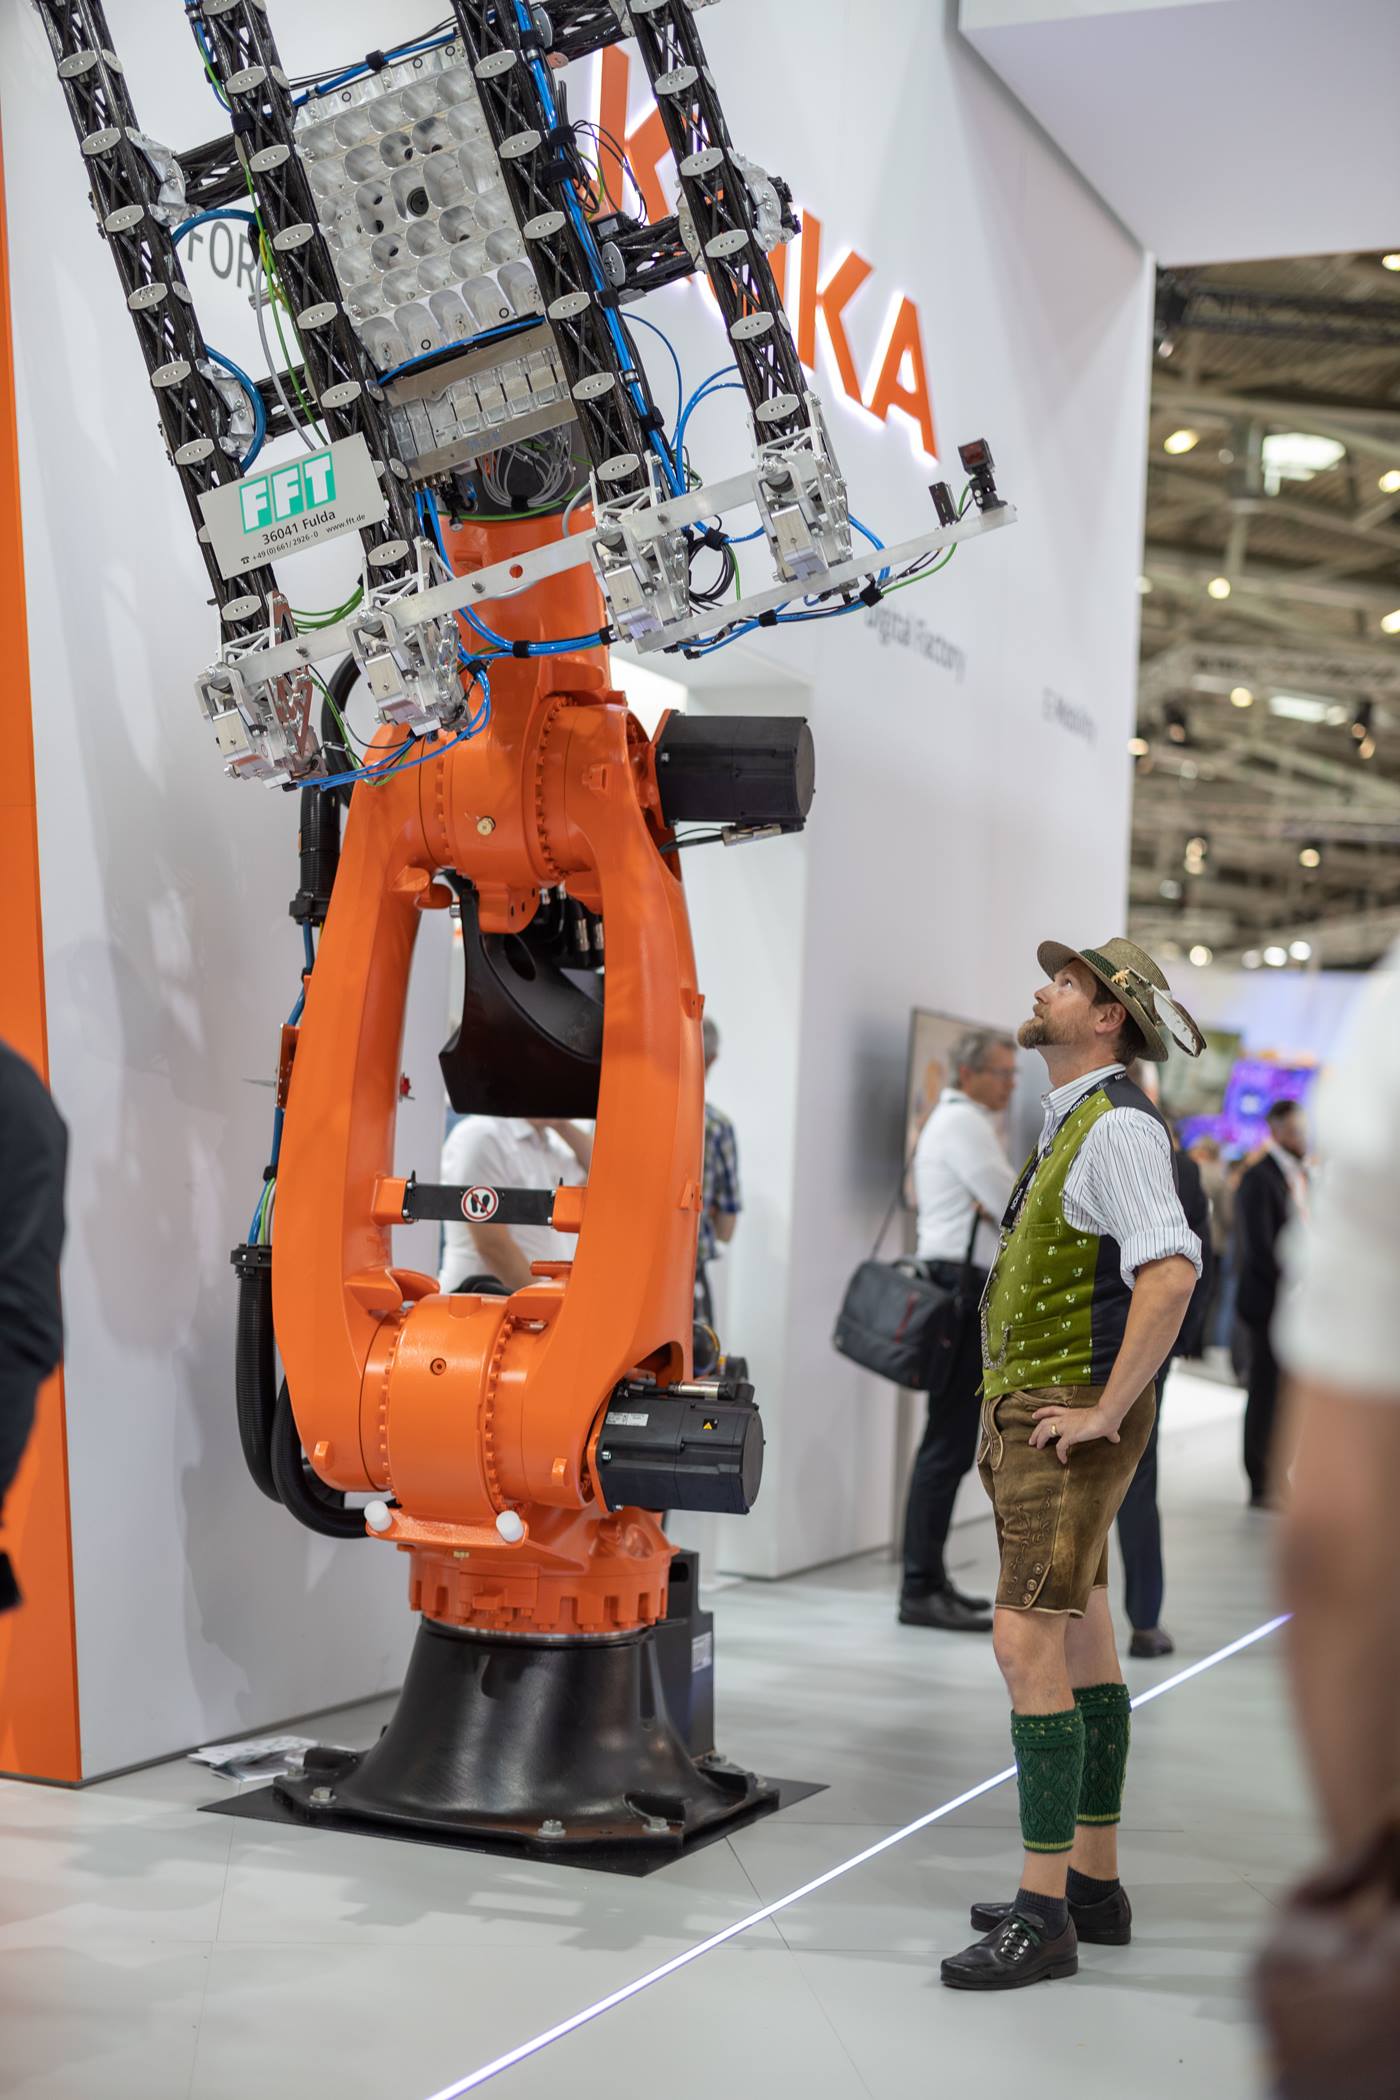 automatica 2022 trade fair visitor in lederhosen looks at KUKA robot at the KUKA booth 